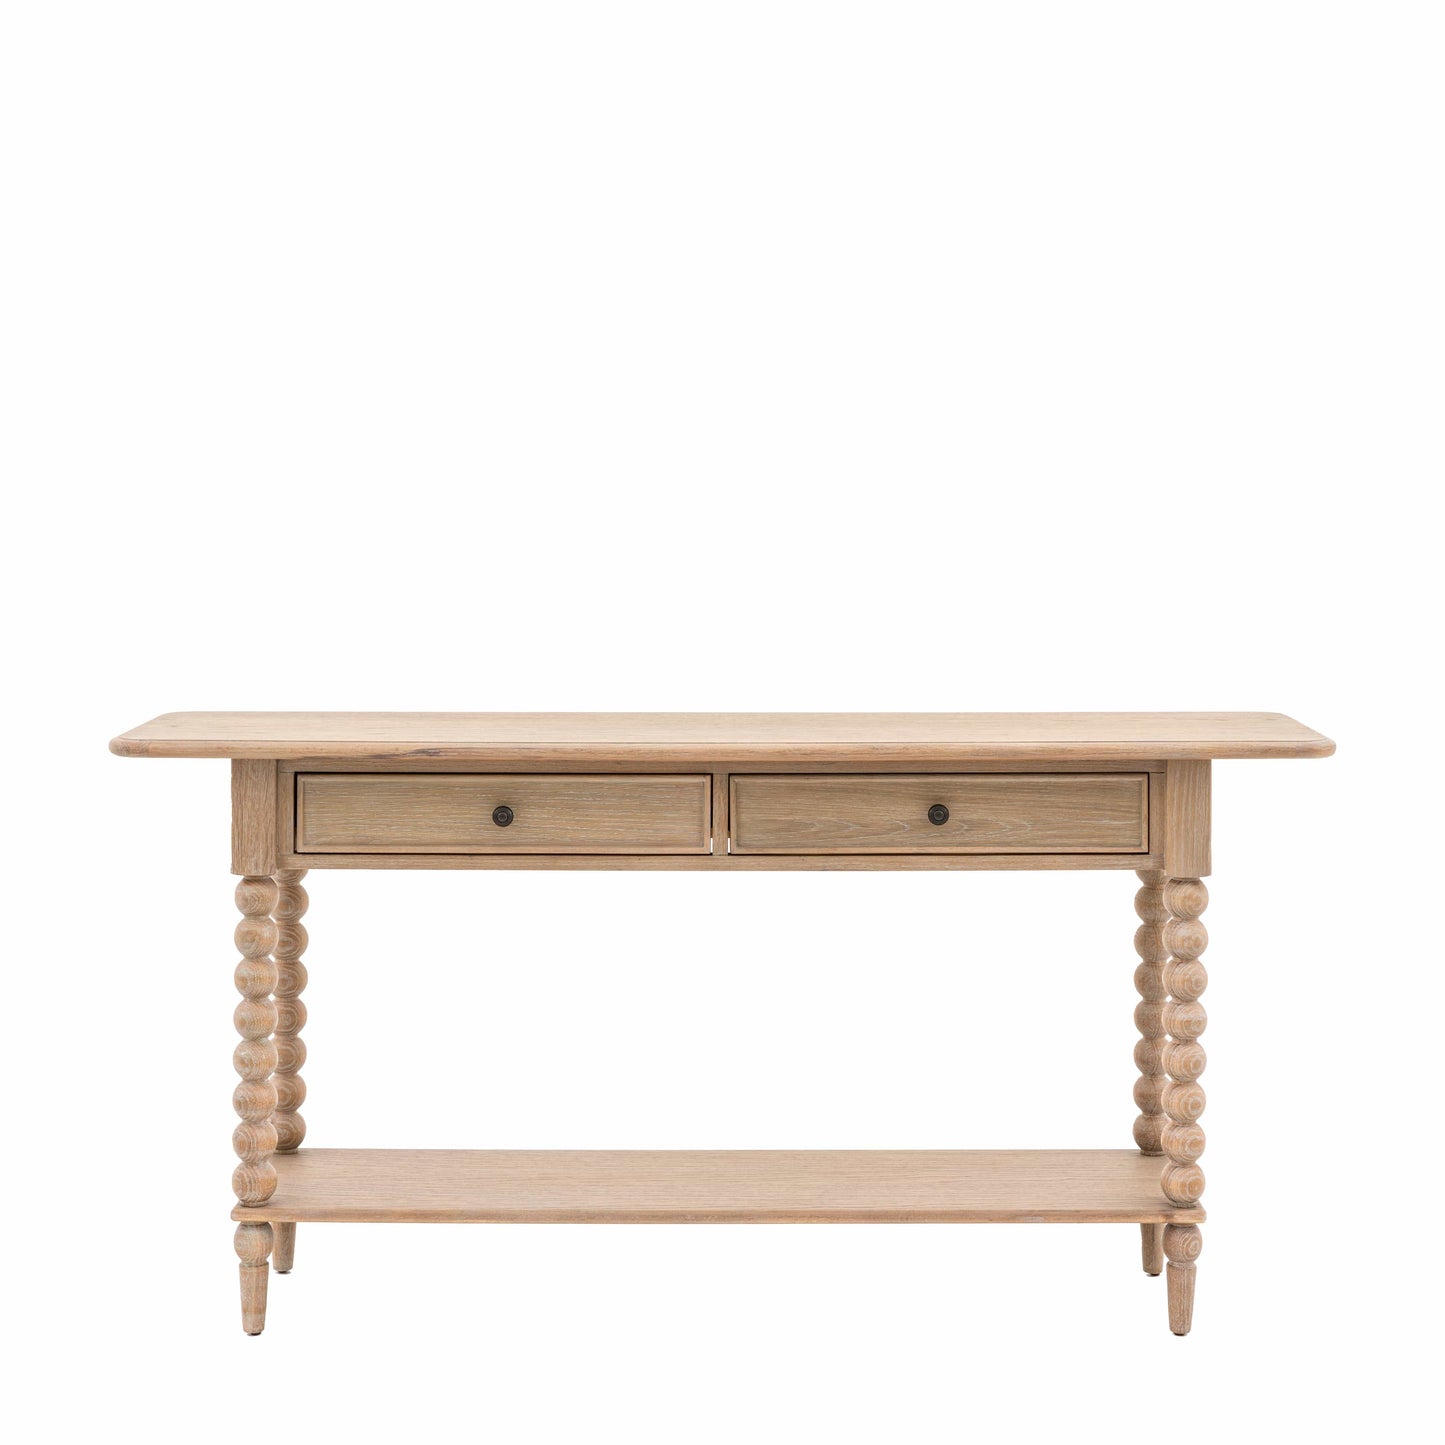 Artisan 2 Drawer Console Table